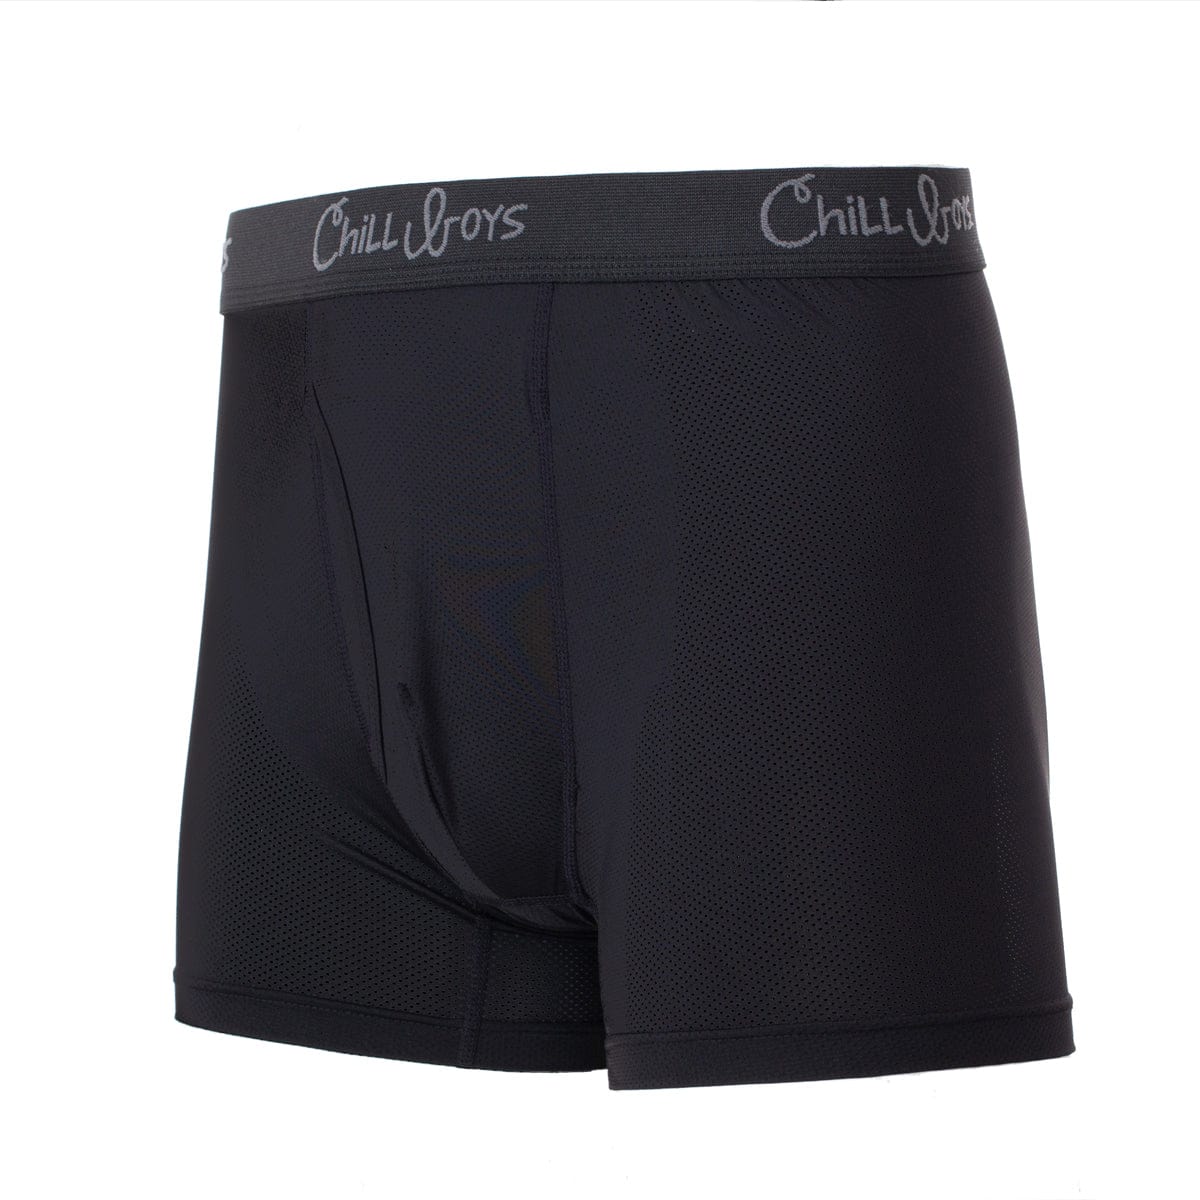 Onyx Black - Chill Boys Soft Stretch, Quick-Dry Trunks - angle view